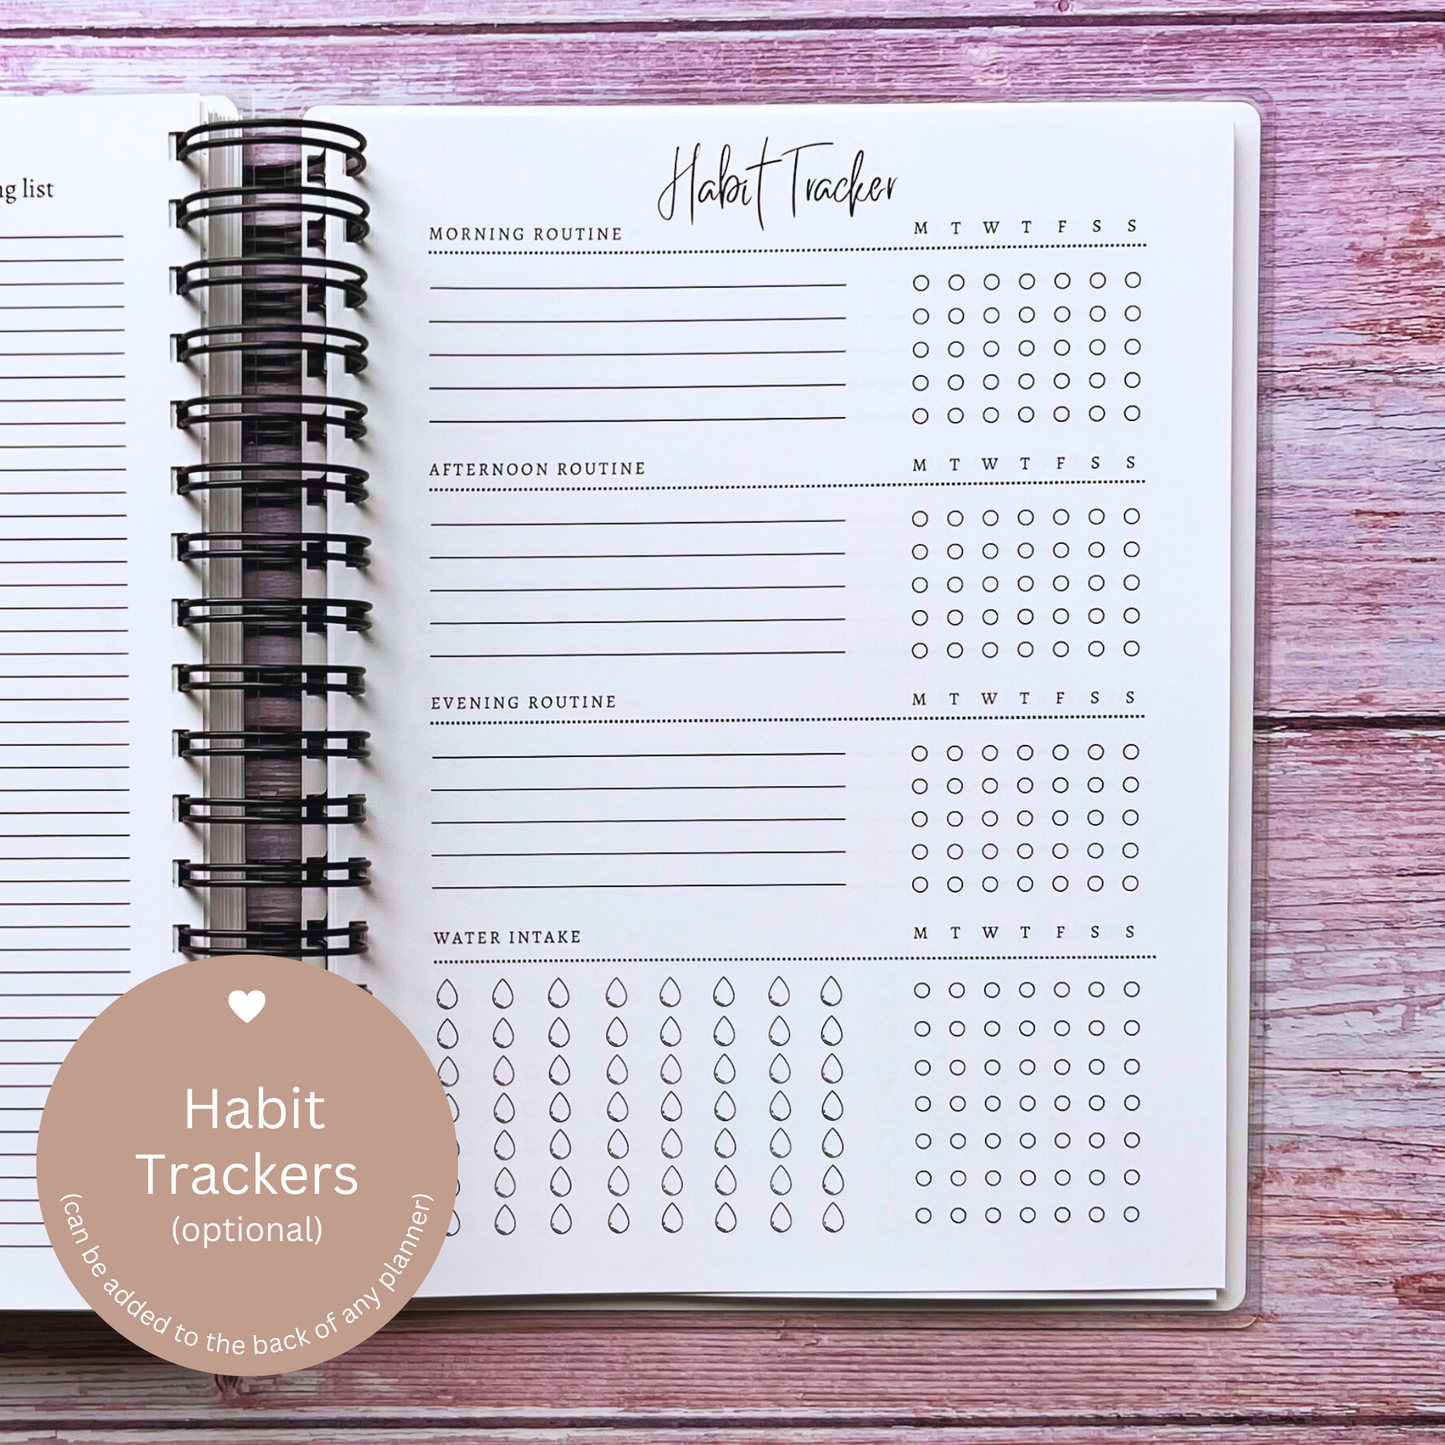 Personalized Weekly Planner | Mystical Spells